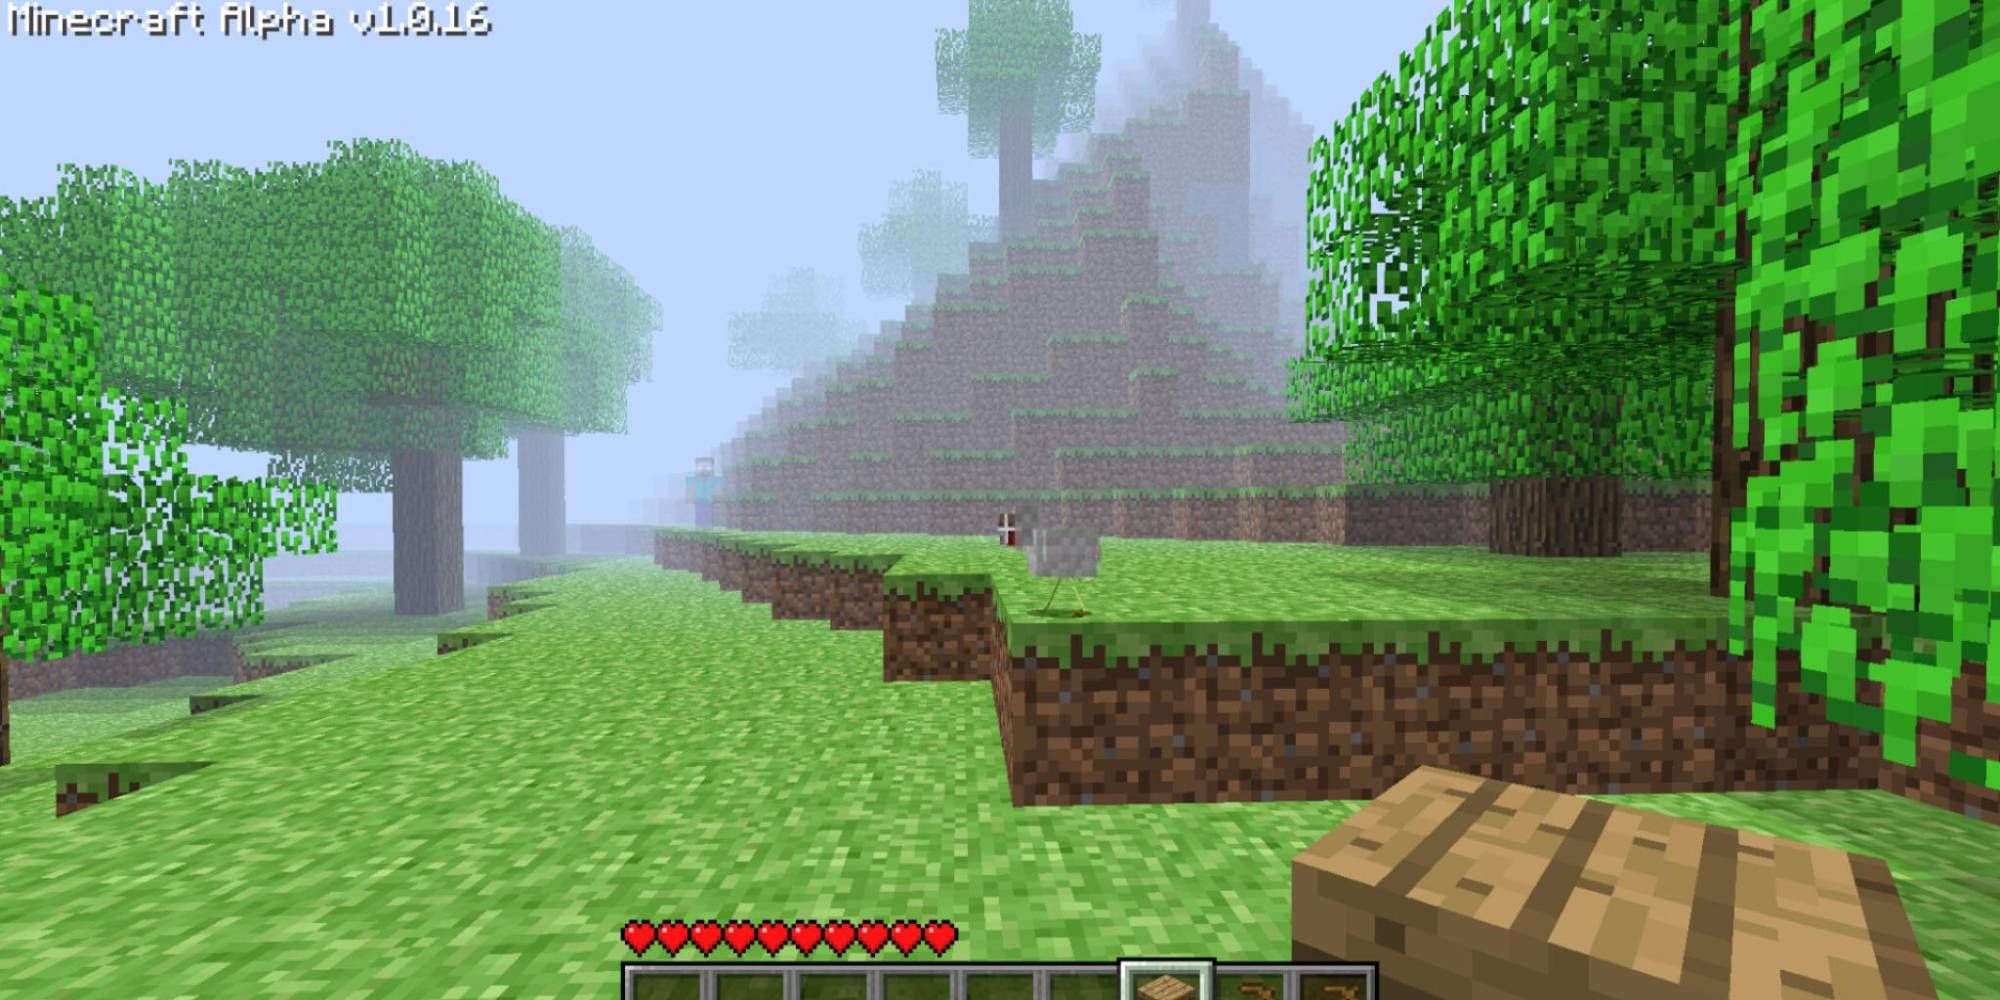 A screenshot from Minecraft Alpha depicting a foggy world and Herobrine